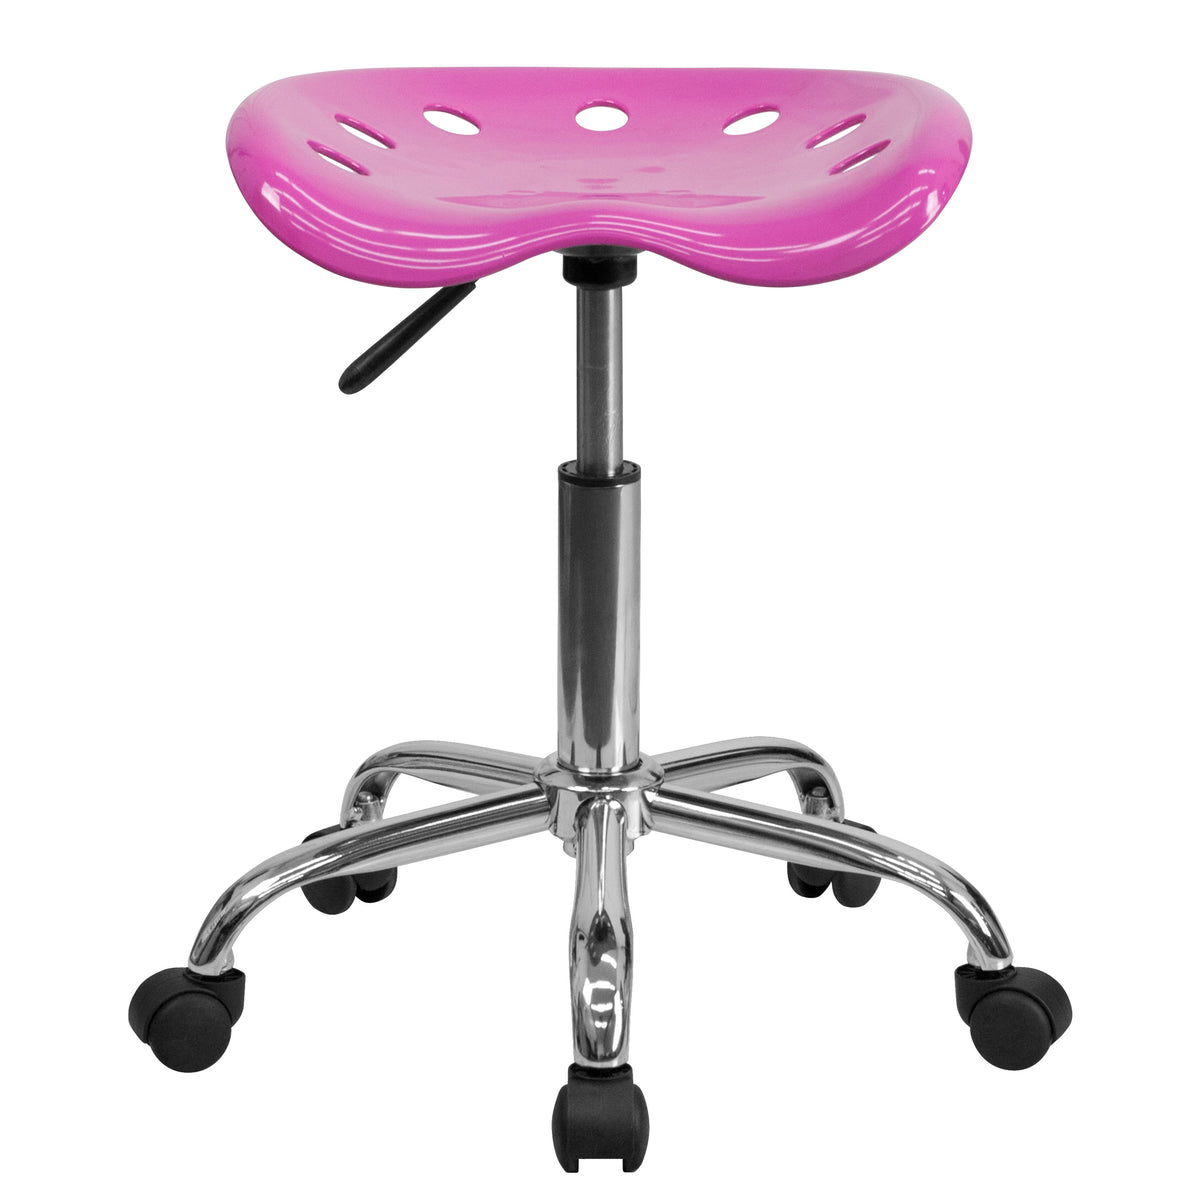 Candy Heart |#| Vibrant Candy Heart Tractor Seat and Chrome Stool - Drafting & Office Stools